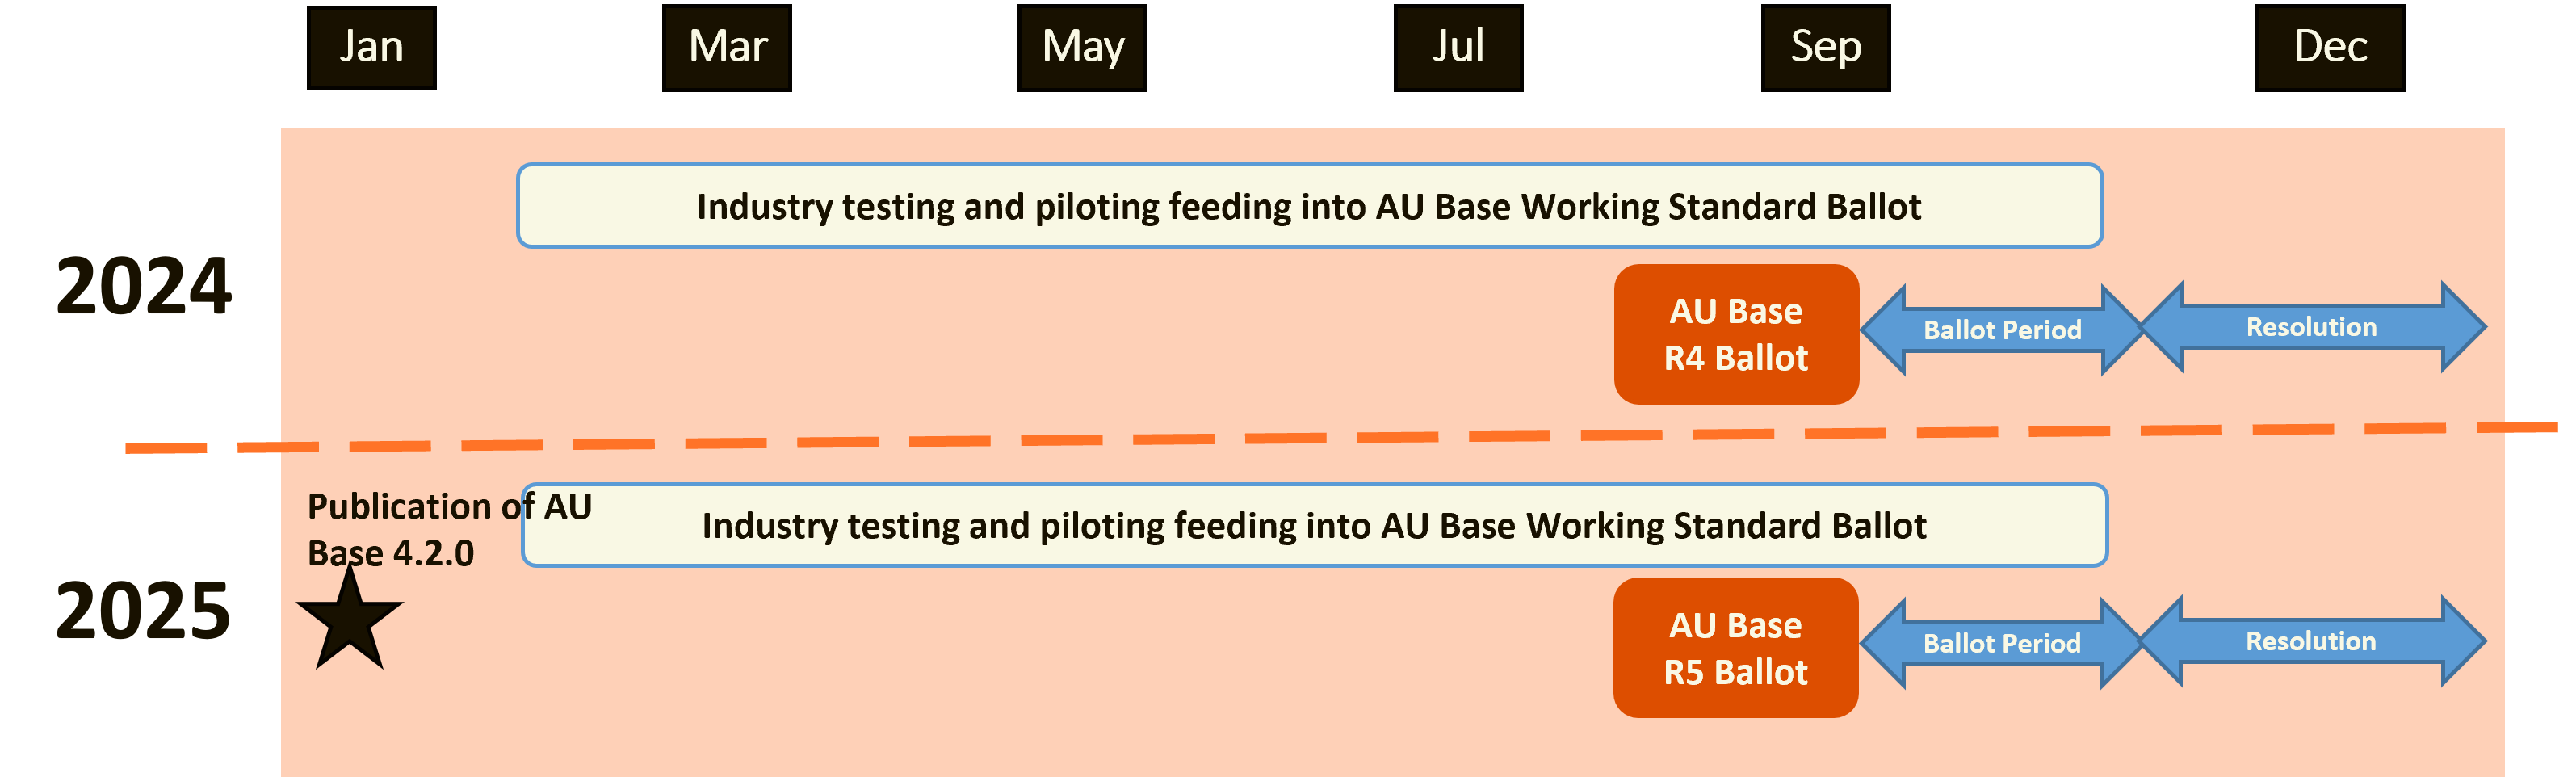 Yearly update of AU Base